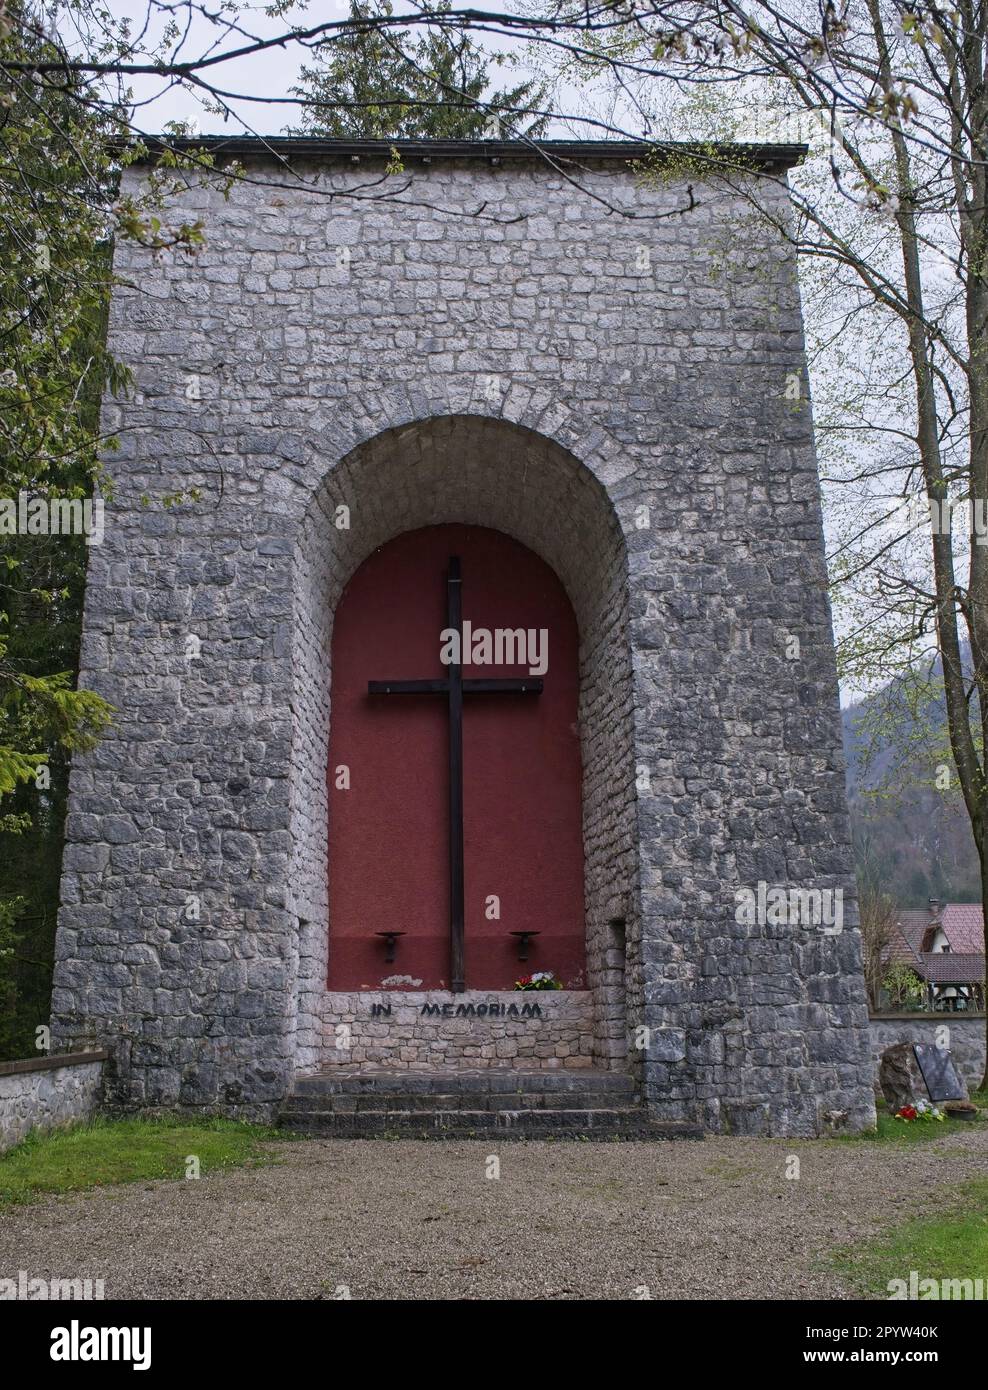 Ebensee, Austria - Apr 24, 2023: Ebensee was a subcamp of Mauthausen concentration camp established by the SS to build tunnels for armaments storage Stock Photo